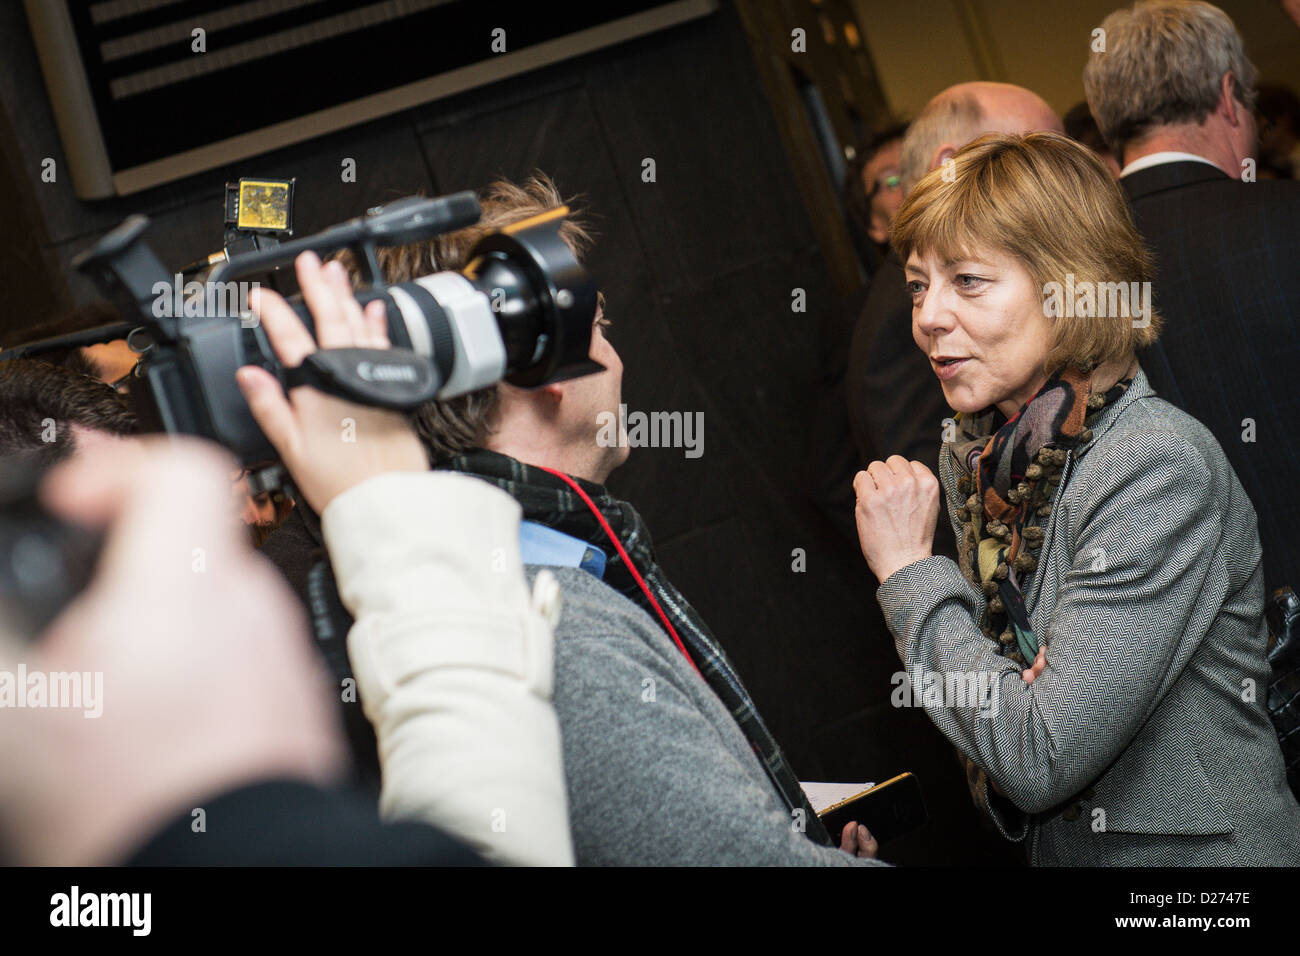 Daniela Schadt, partner of German President Joachim Gauck talks to journalists before the arrival of Gauck, at the Federal Labour Office in Nuernberg, Germany 15 January 2013. Photo: David Ebener Stock Photo